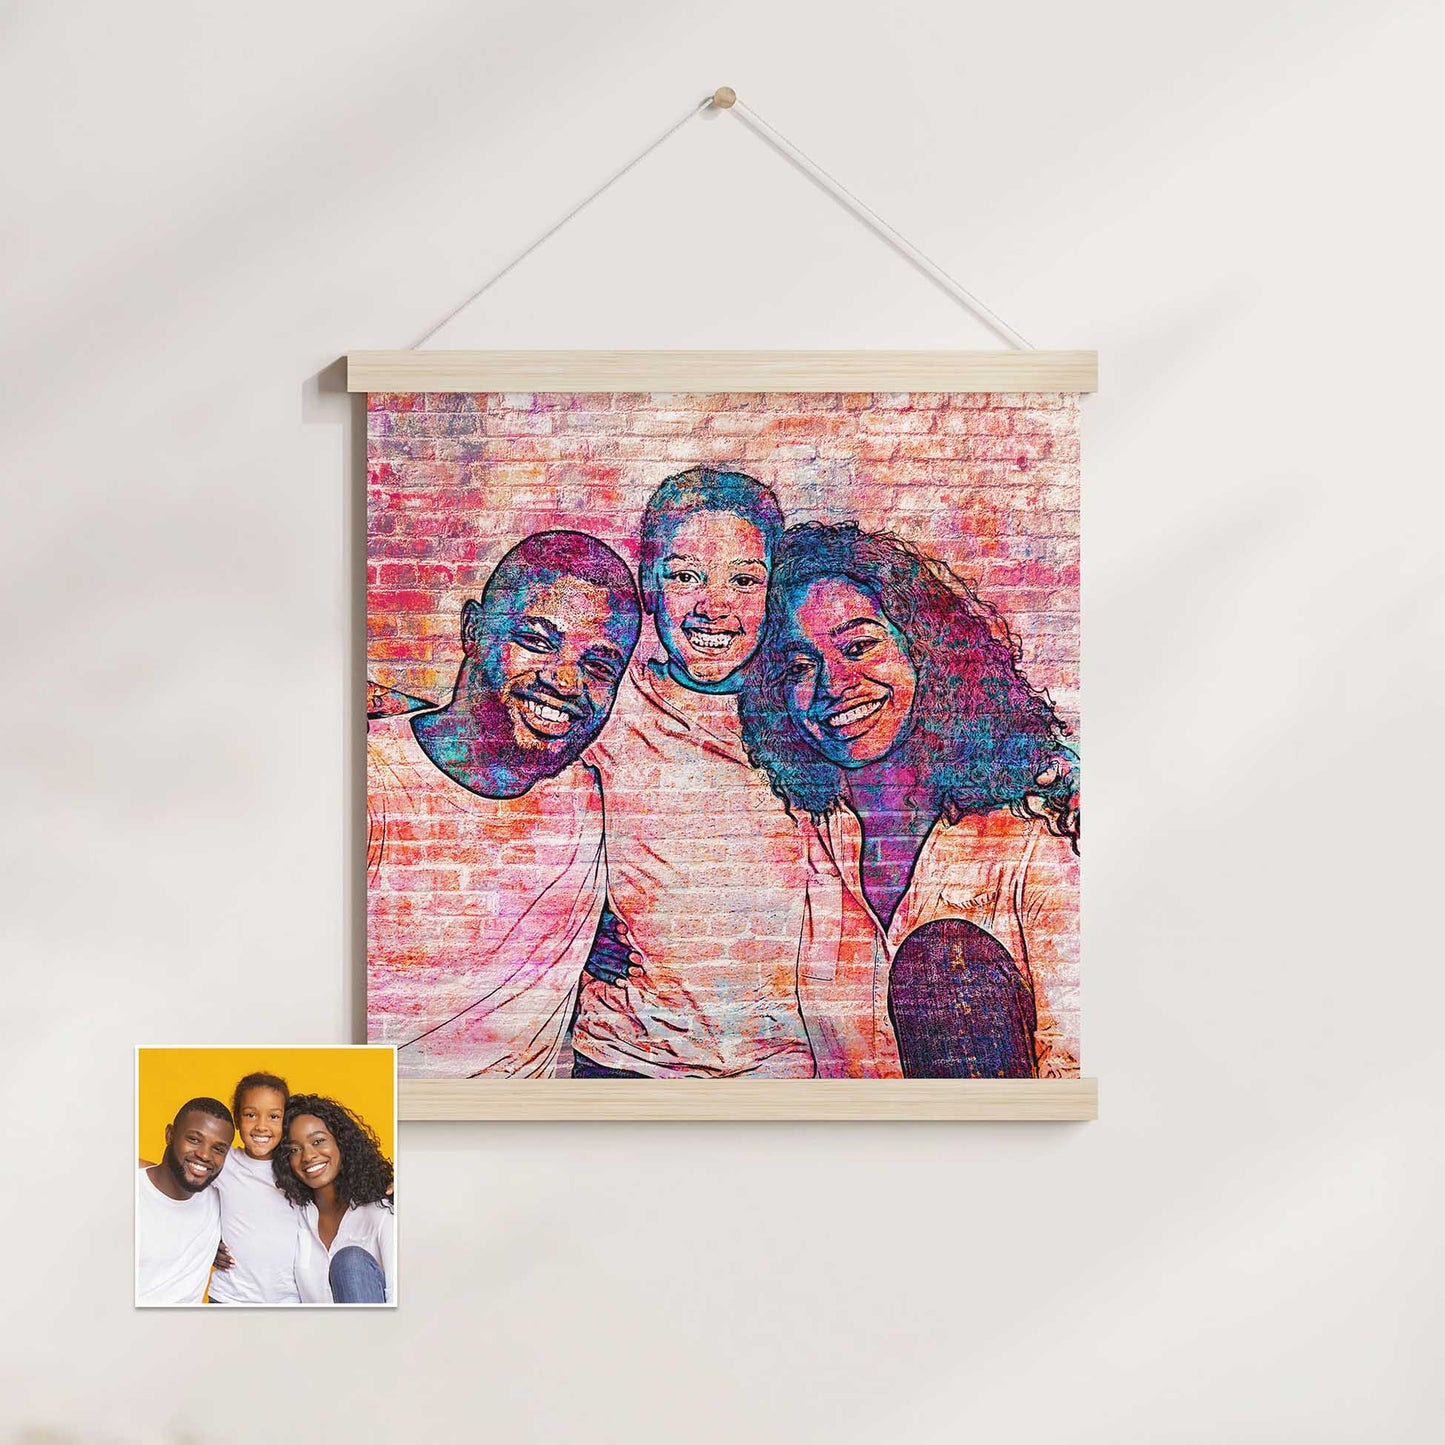 Make a bold statement with our Personalised Brick Graffiti Street Art Poster Hanger. Its dynamic graffiti street art style brings an urban edge to your space, while the realistic brick wall texture adds depth and character